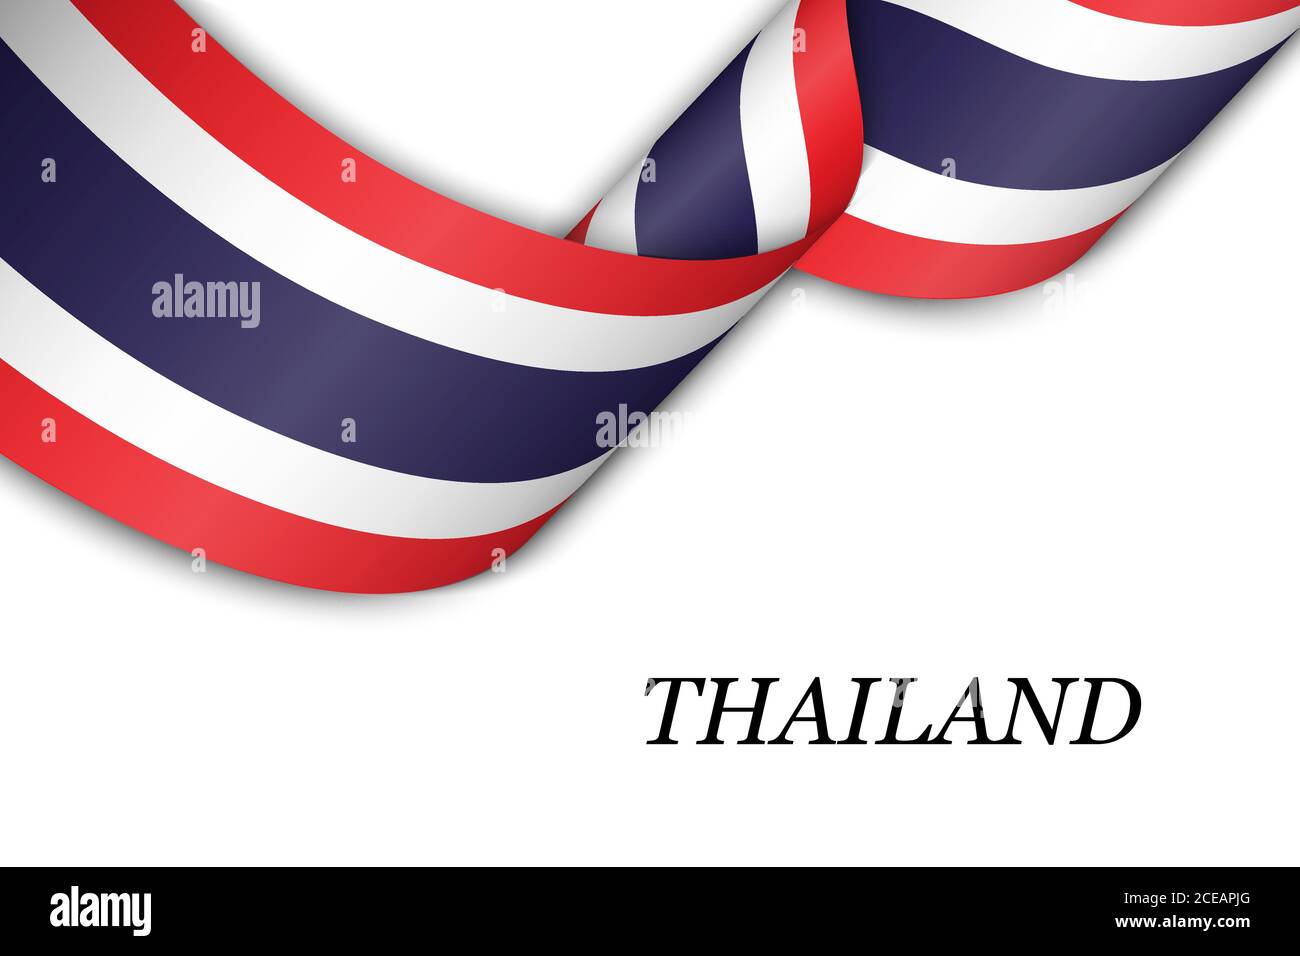 Waving ribbon or banner with flag of Thailand Stock Vector